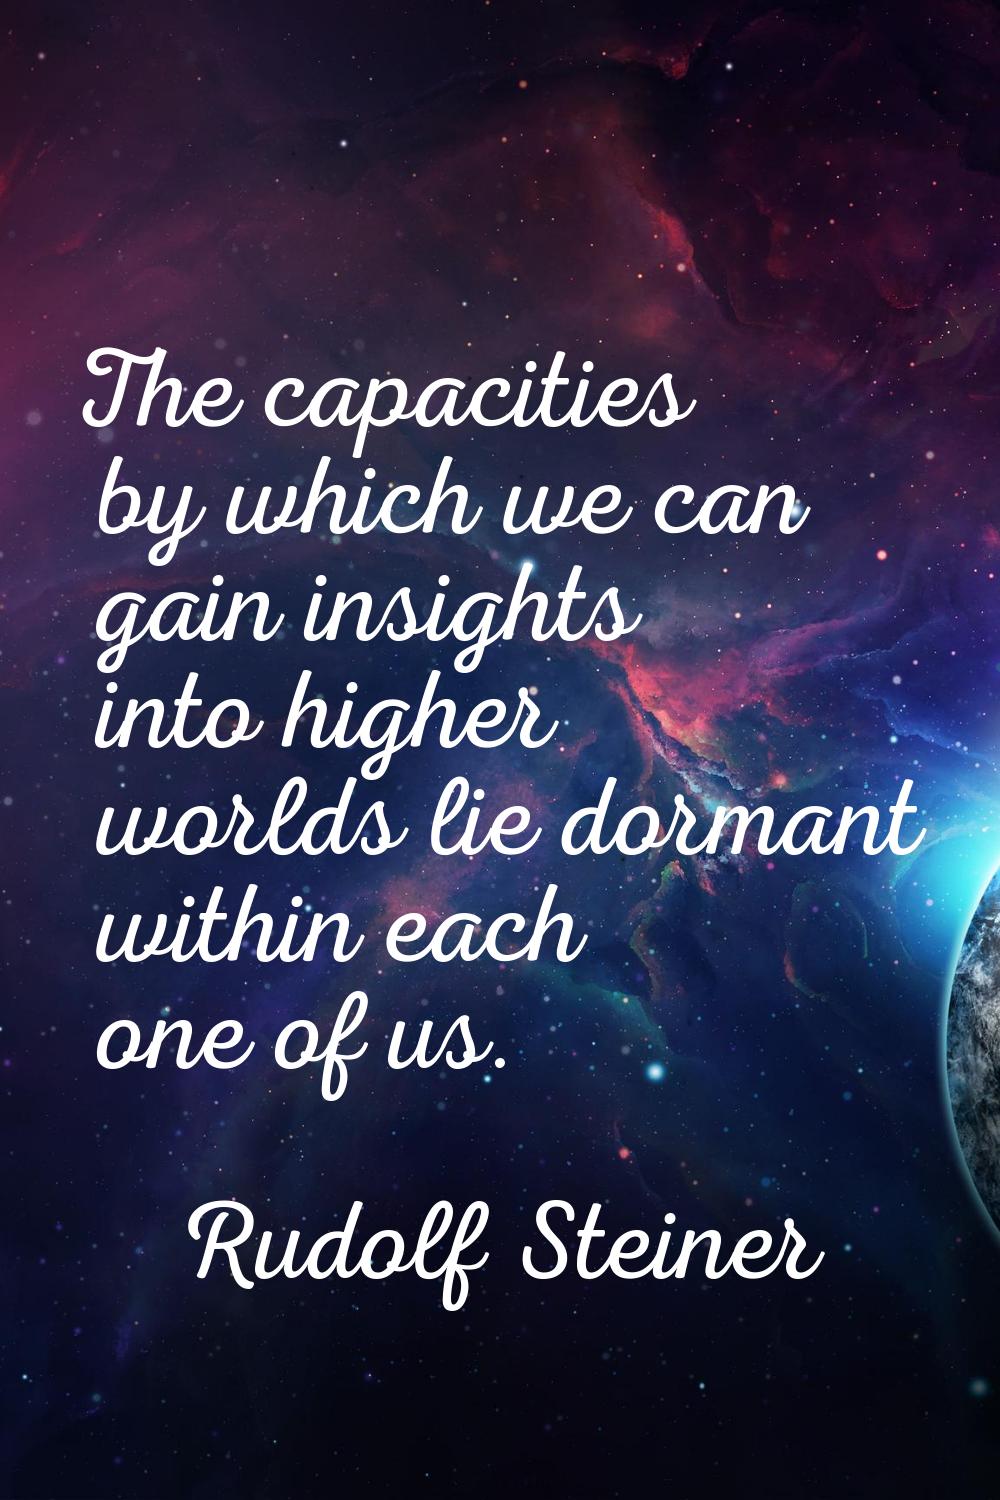 The capacities by which we can gain insights into higher worlds lie dormant within each one of us.